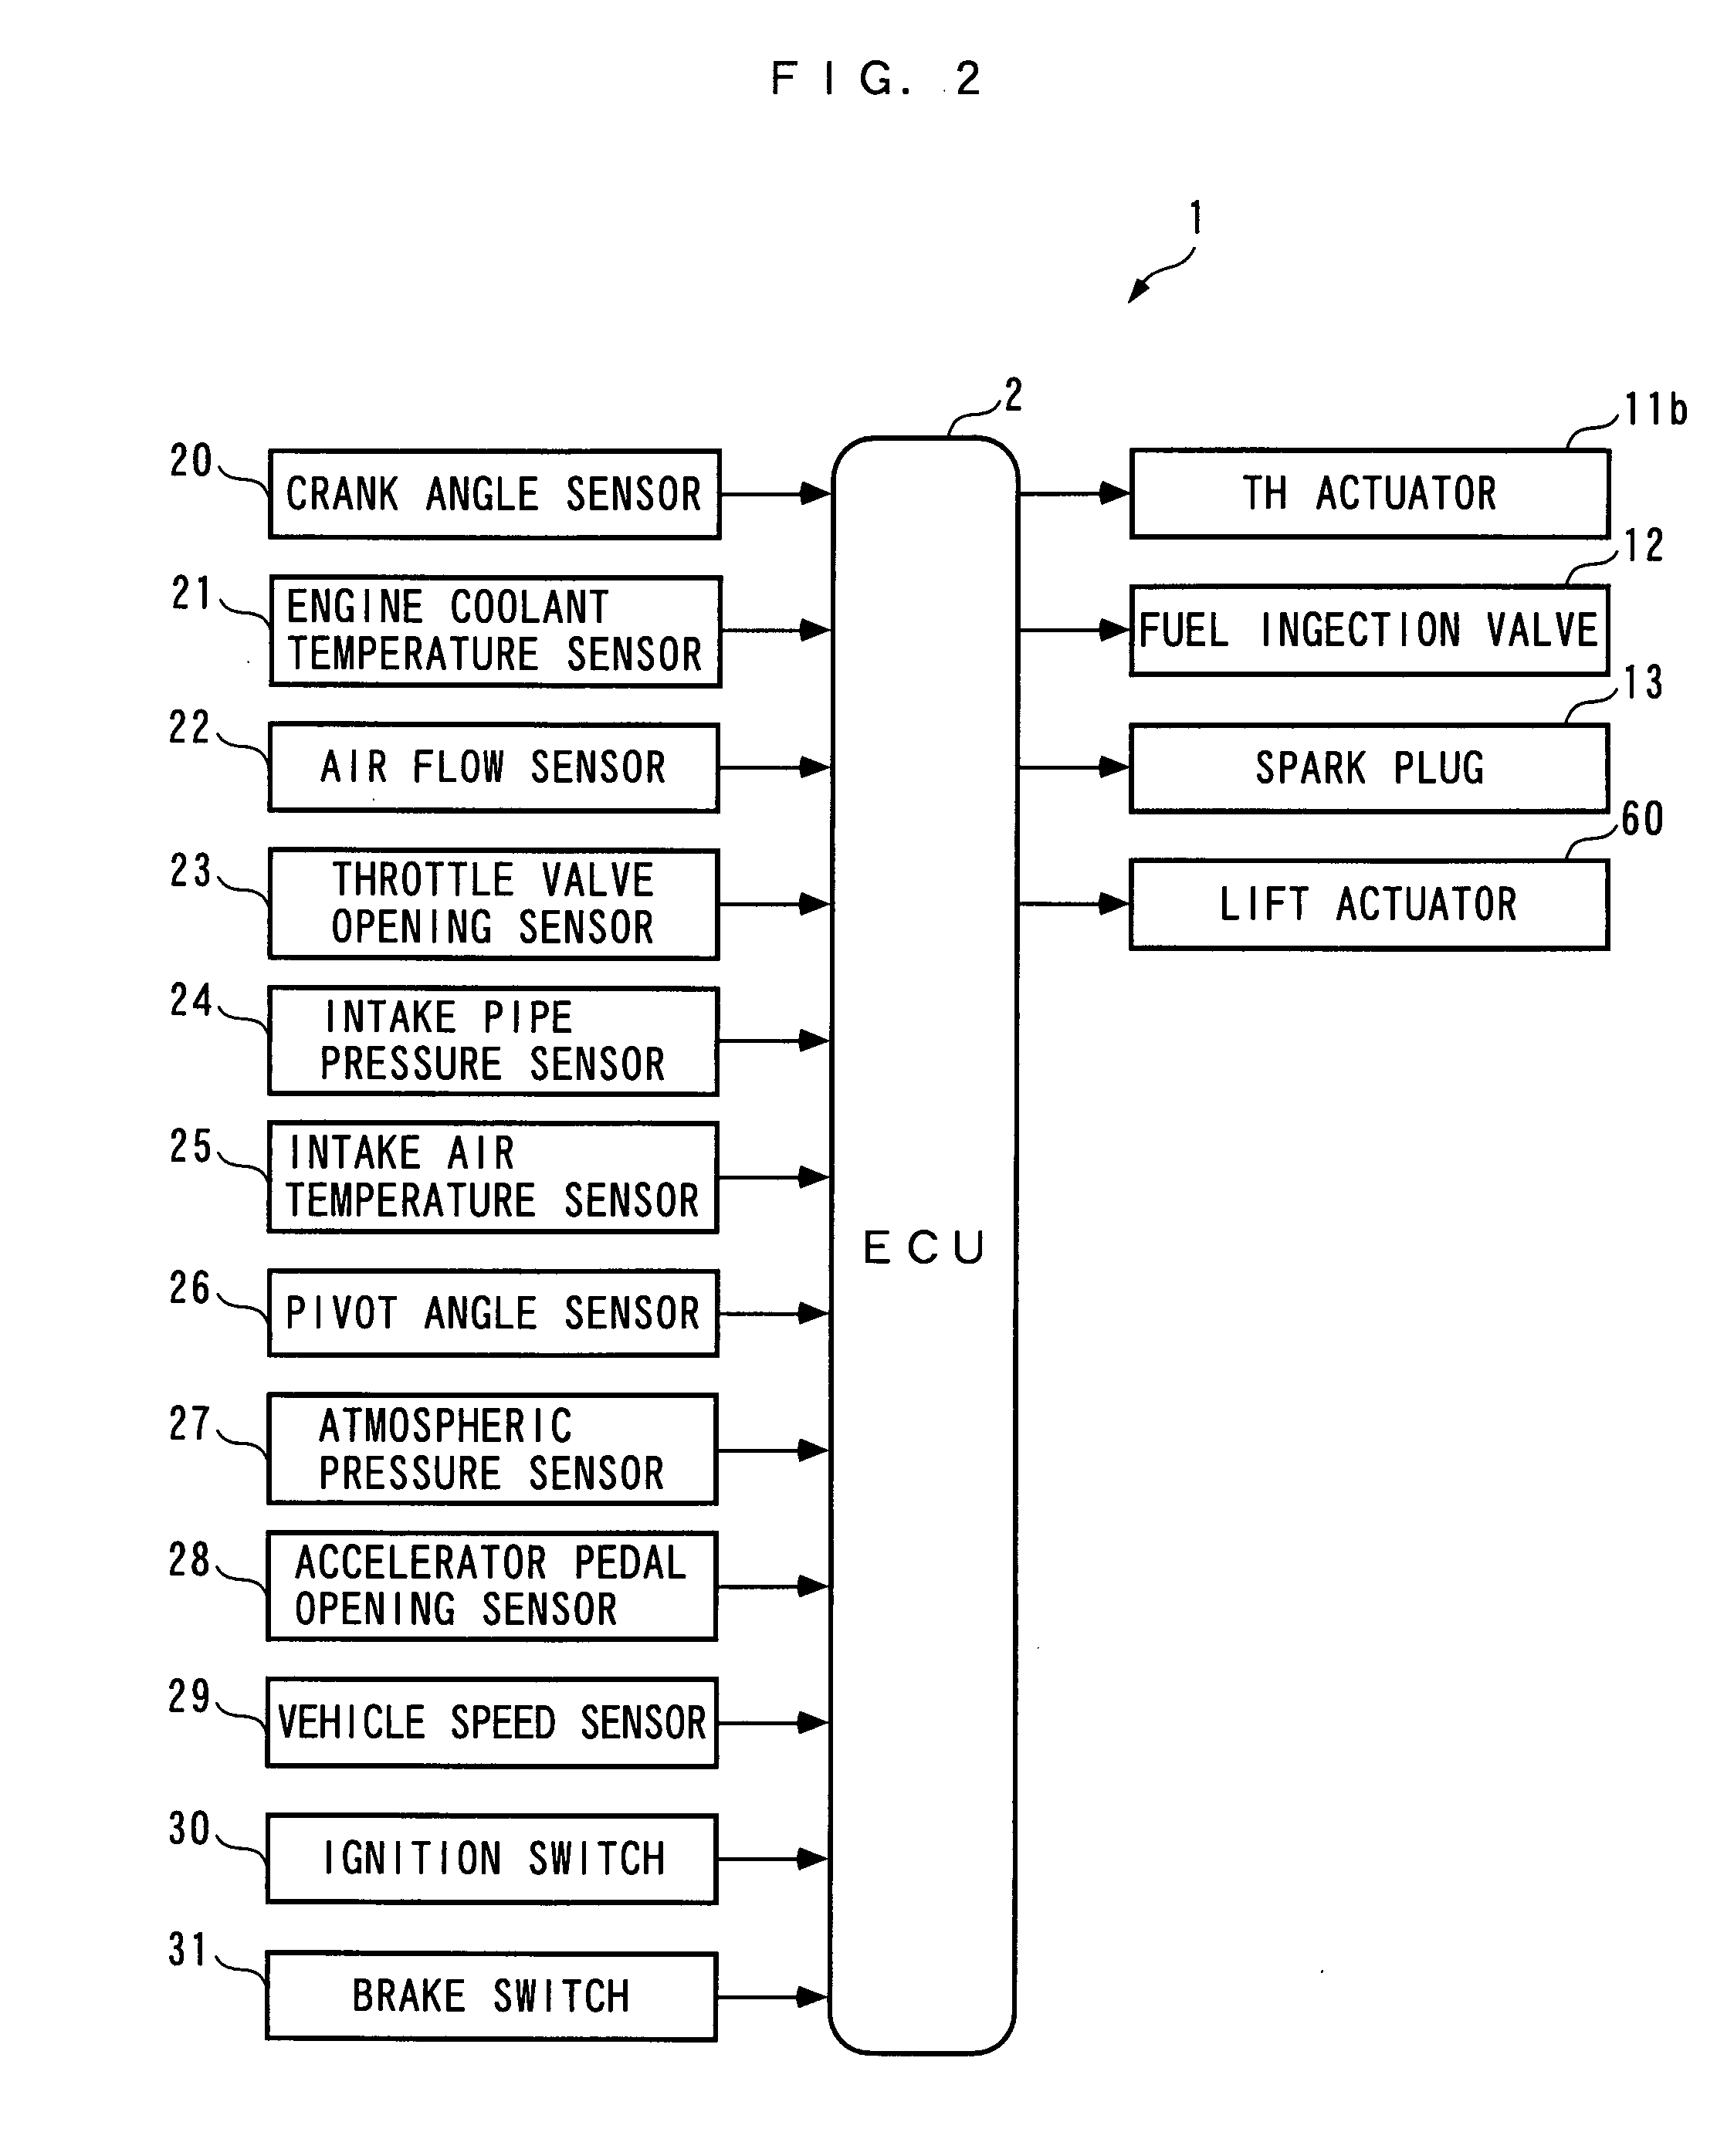 Control System For Plant And Internal Combustion Engine